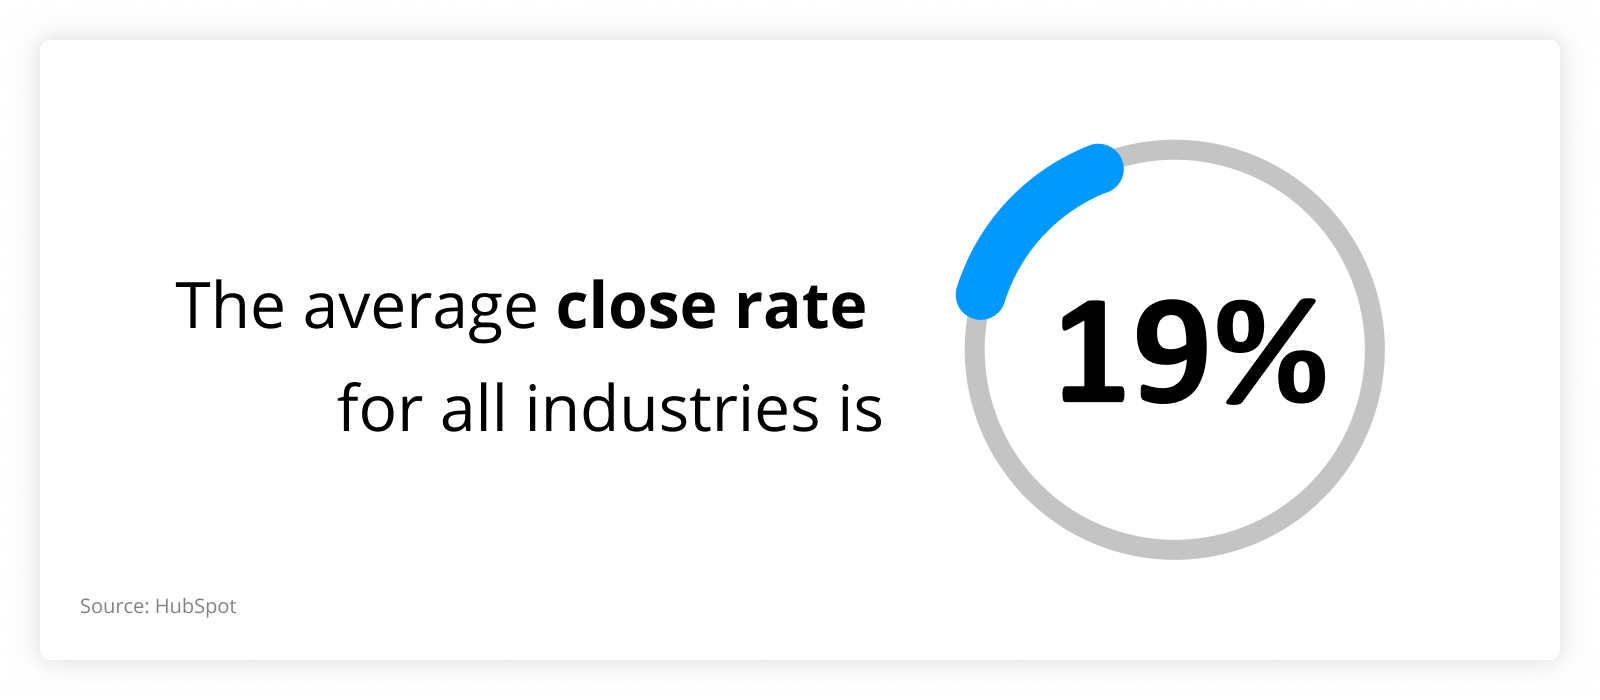 graph showing that The average close rate for all industries is 19%.